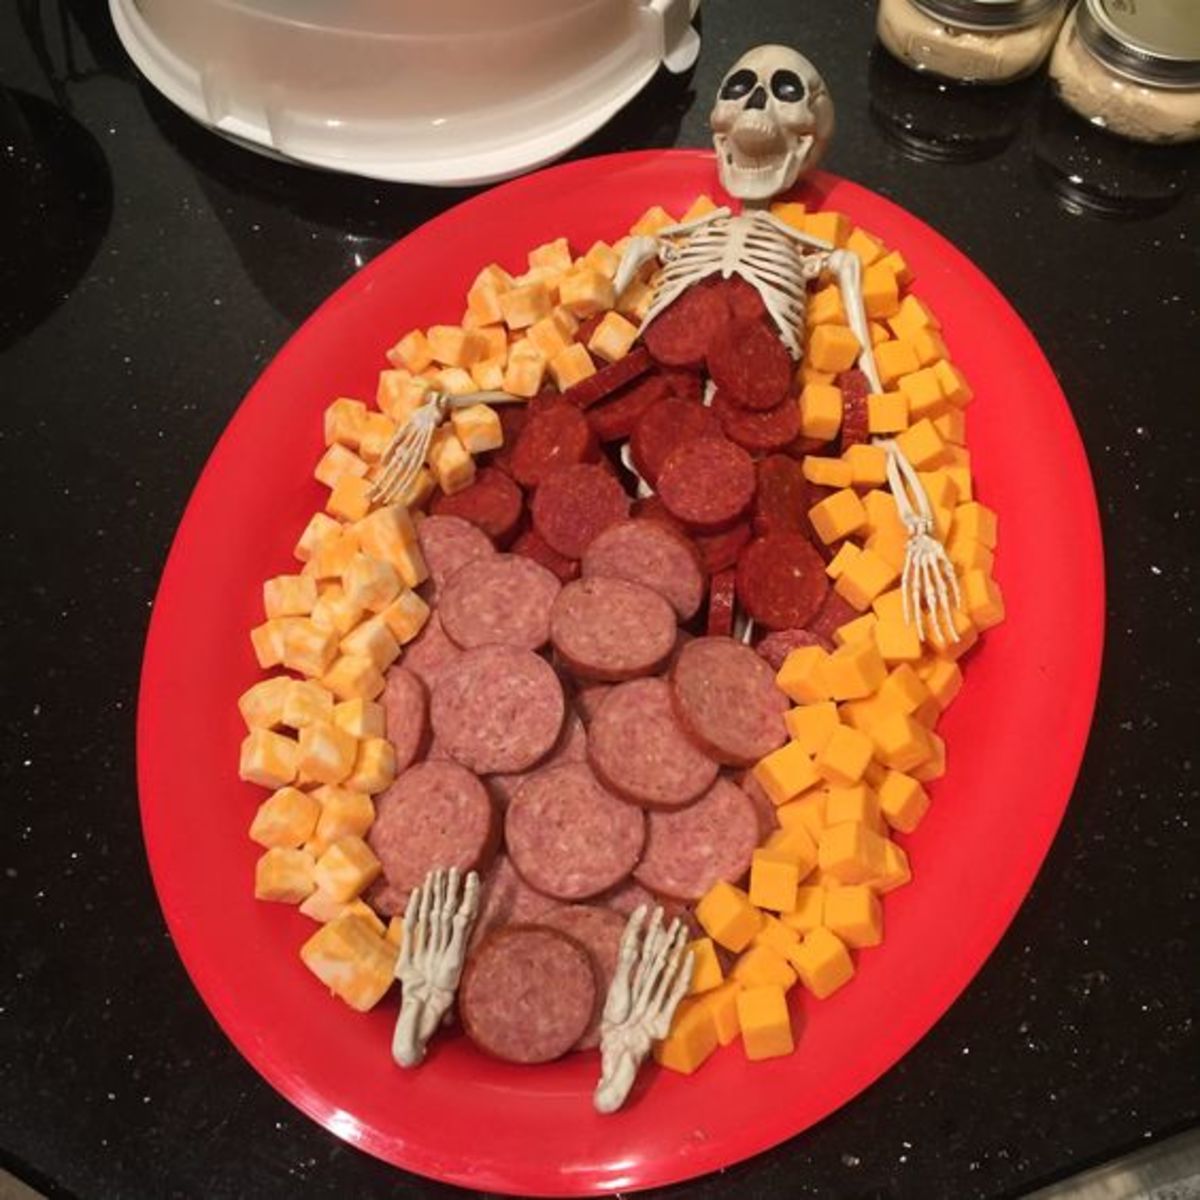 horror-themed-party-food